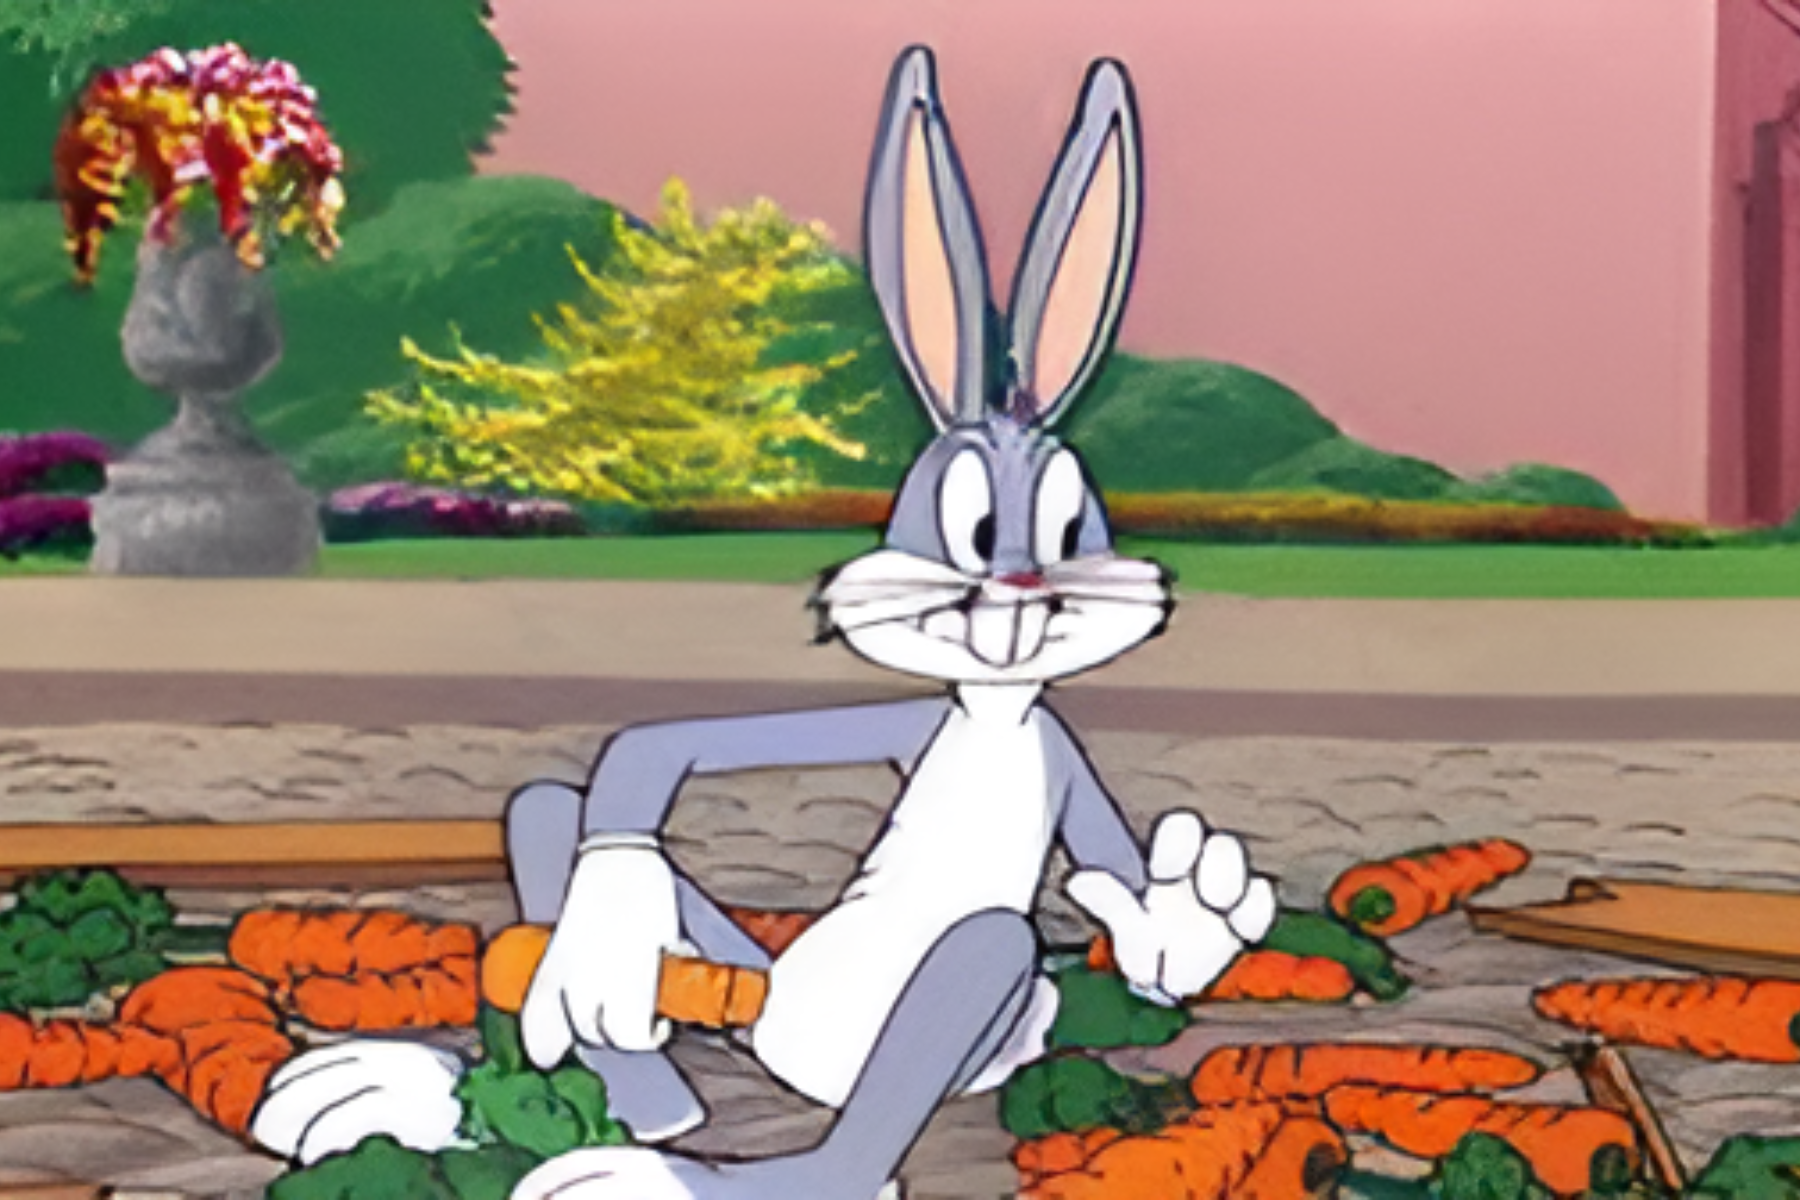 Bugs Bunny is sitting next to carrots